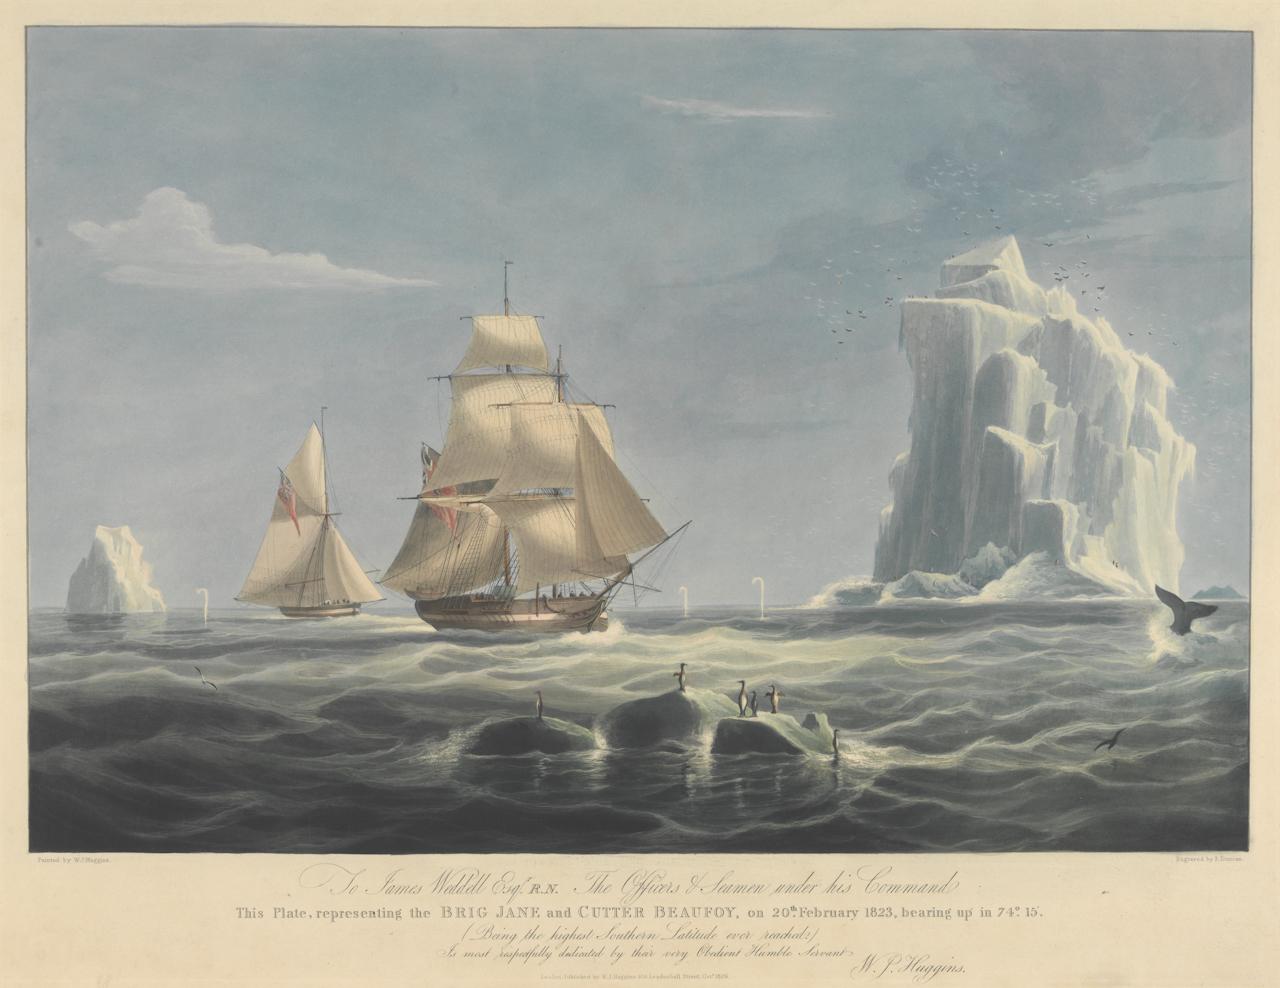 James Weddell's 1822-24 expedition to Antarctica (PAH8482, National Maritime Museum)